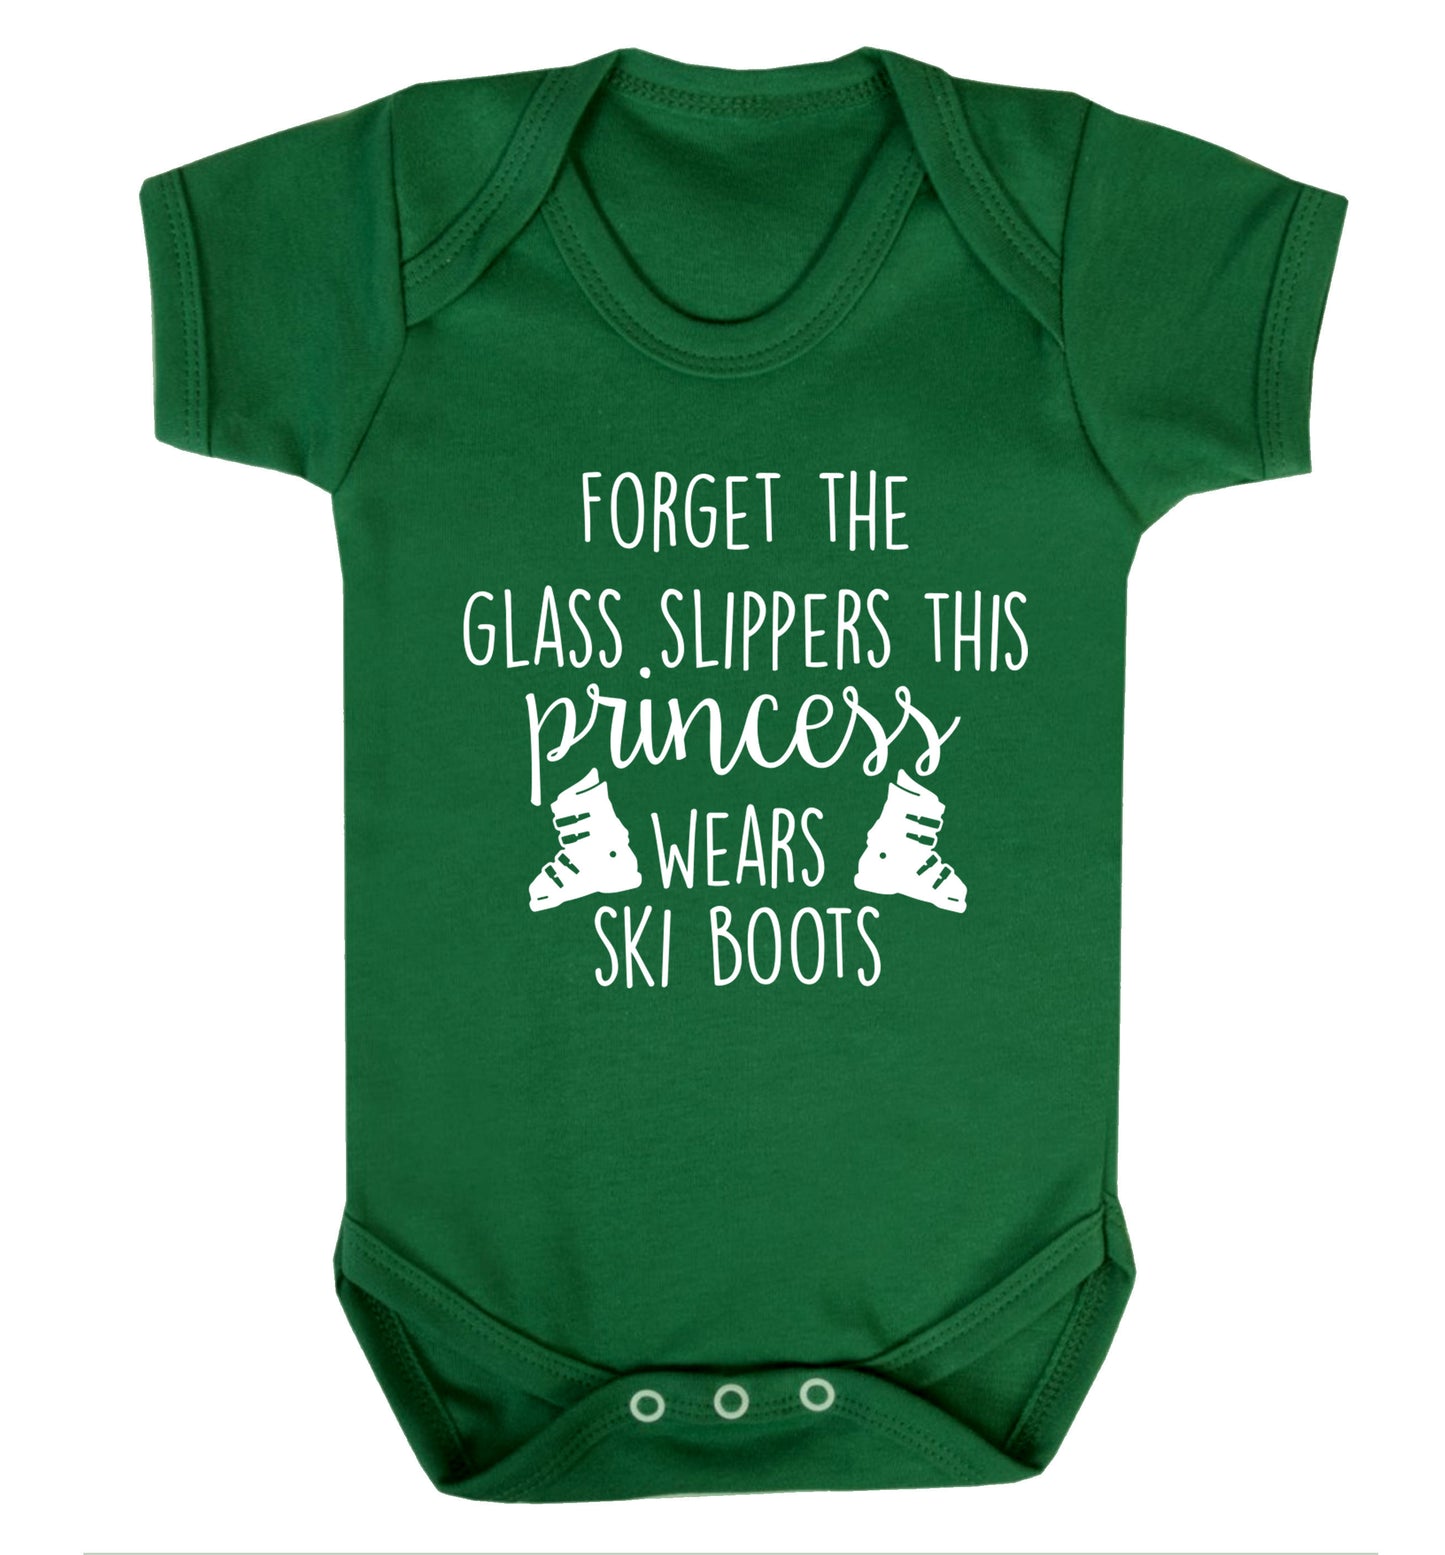 Forget the glass slippers this princess wears ski boots Baby Vest green 18-24 months